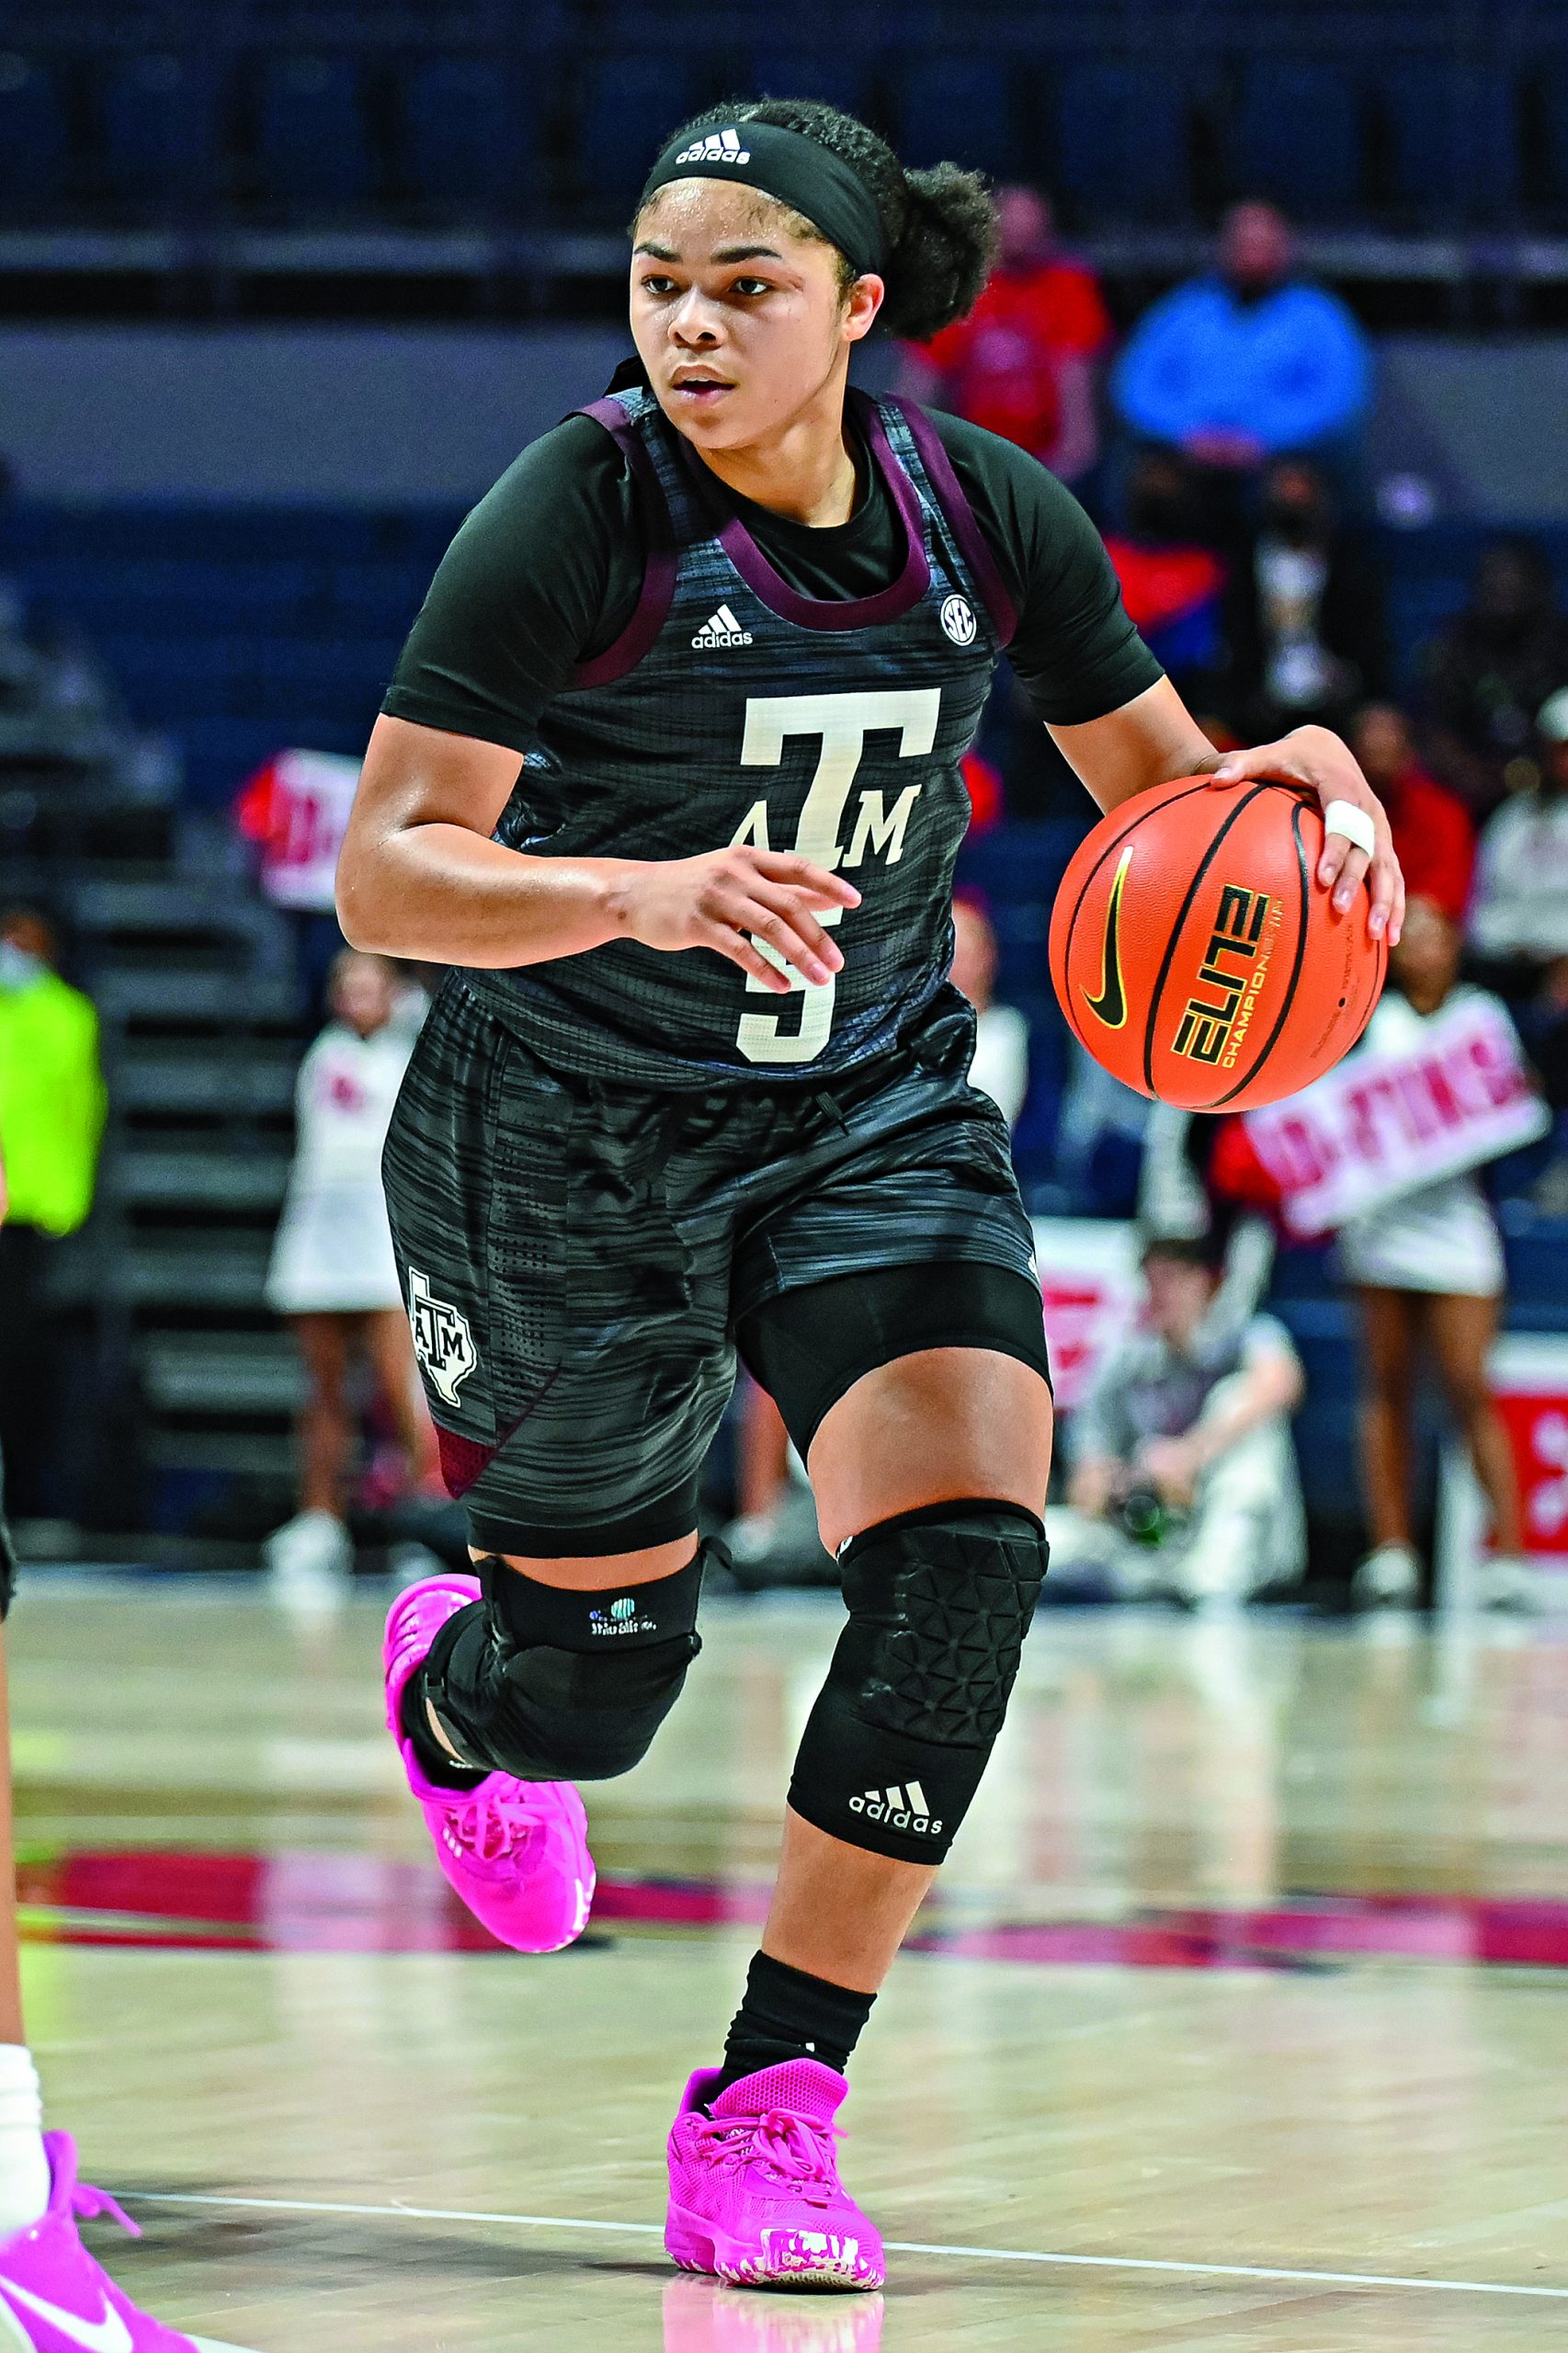 Texas A&M Guard Jordan Nixon on the Importance of Title IX and How is Changed the Landscape for Women